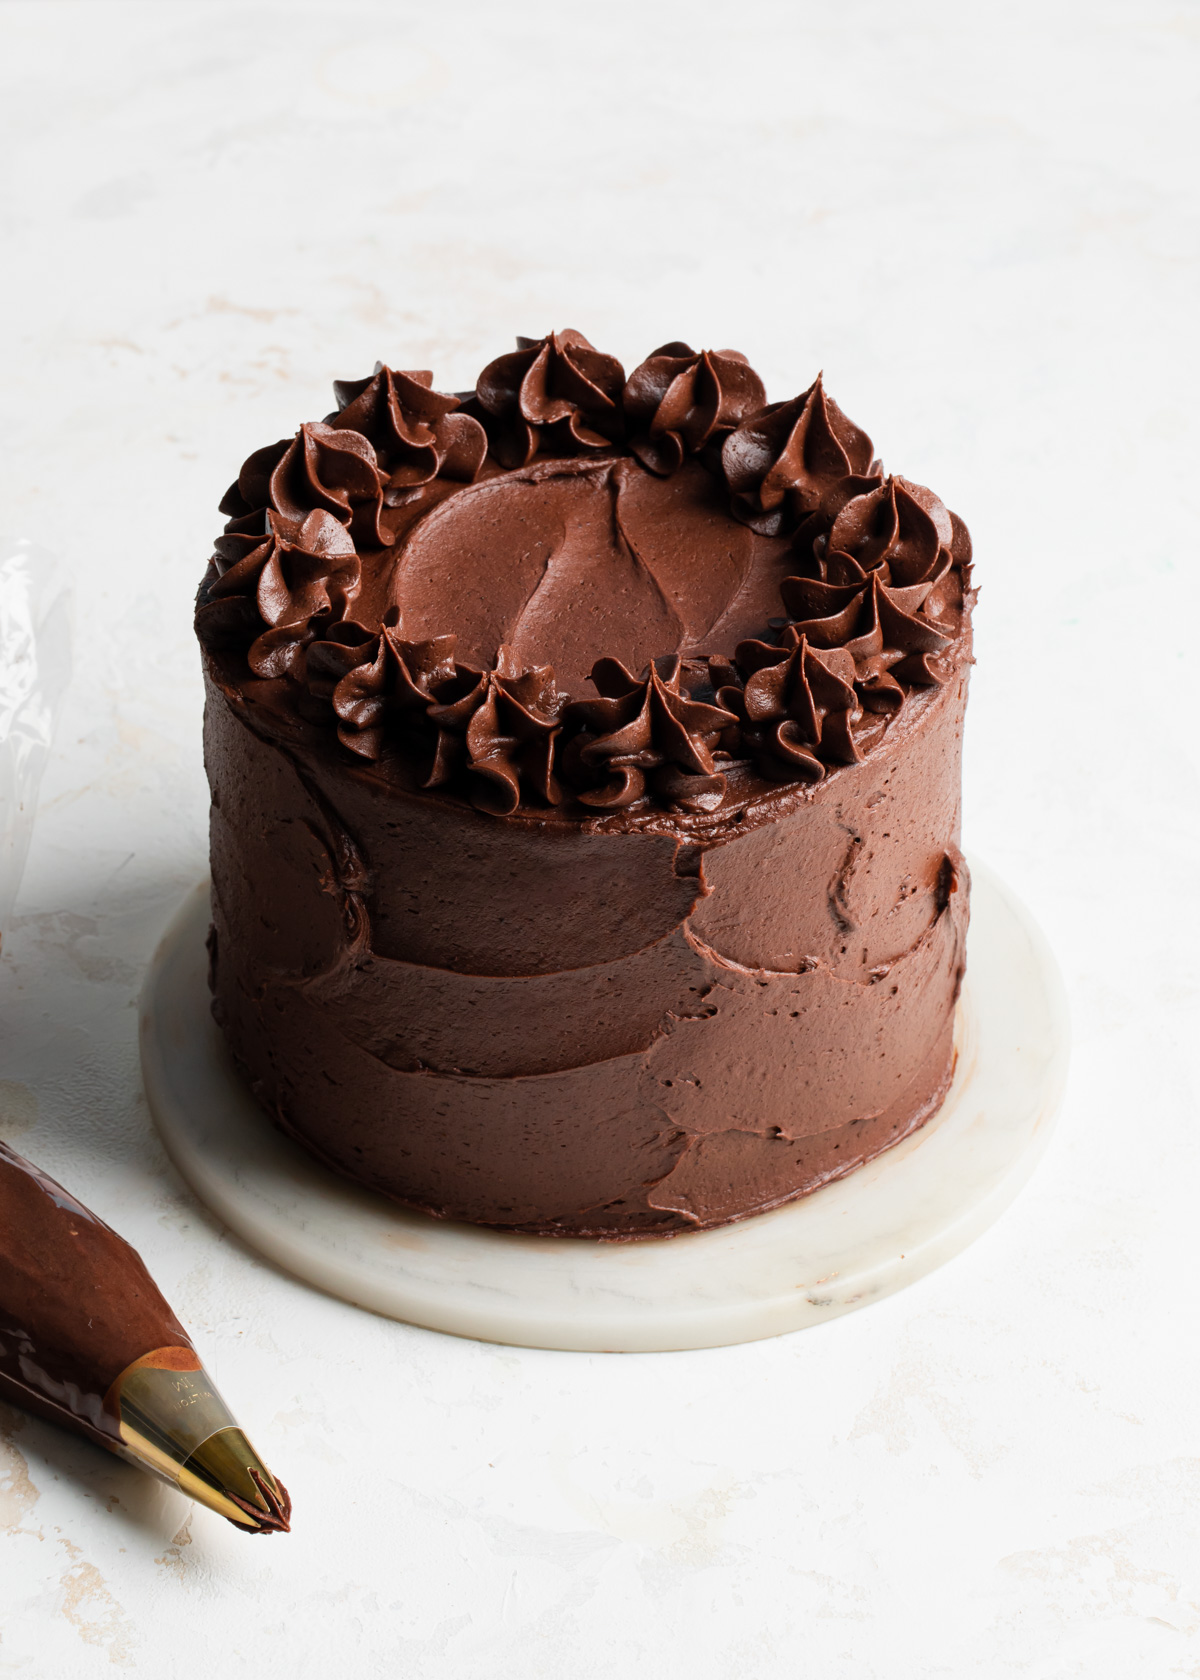 A fully frosted chocolate orange cake with piped fudge frosting on top